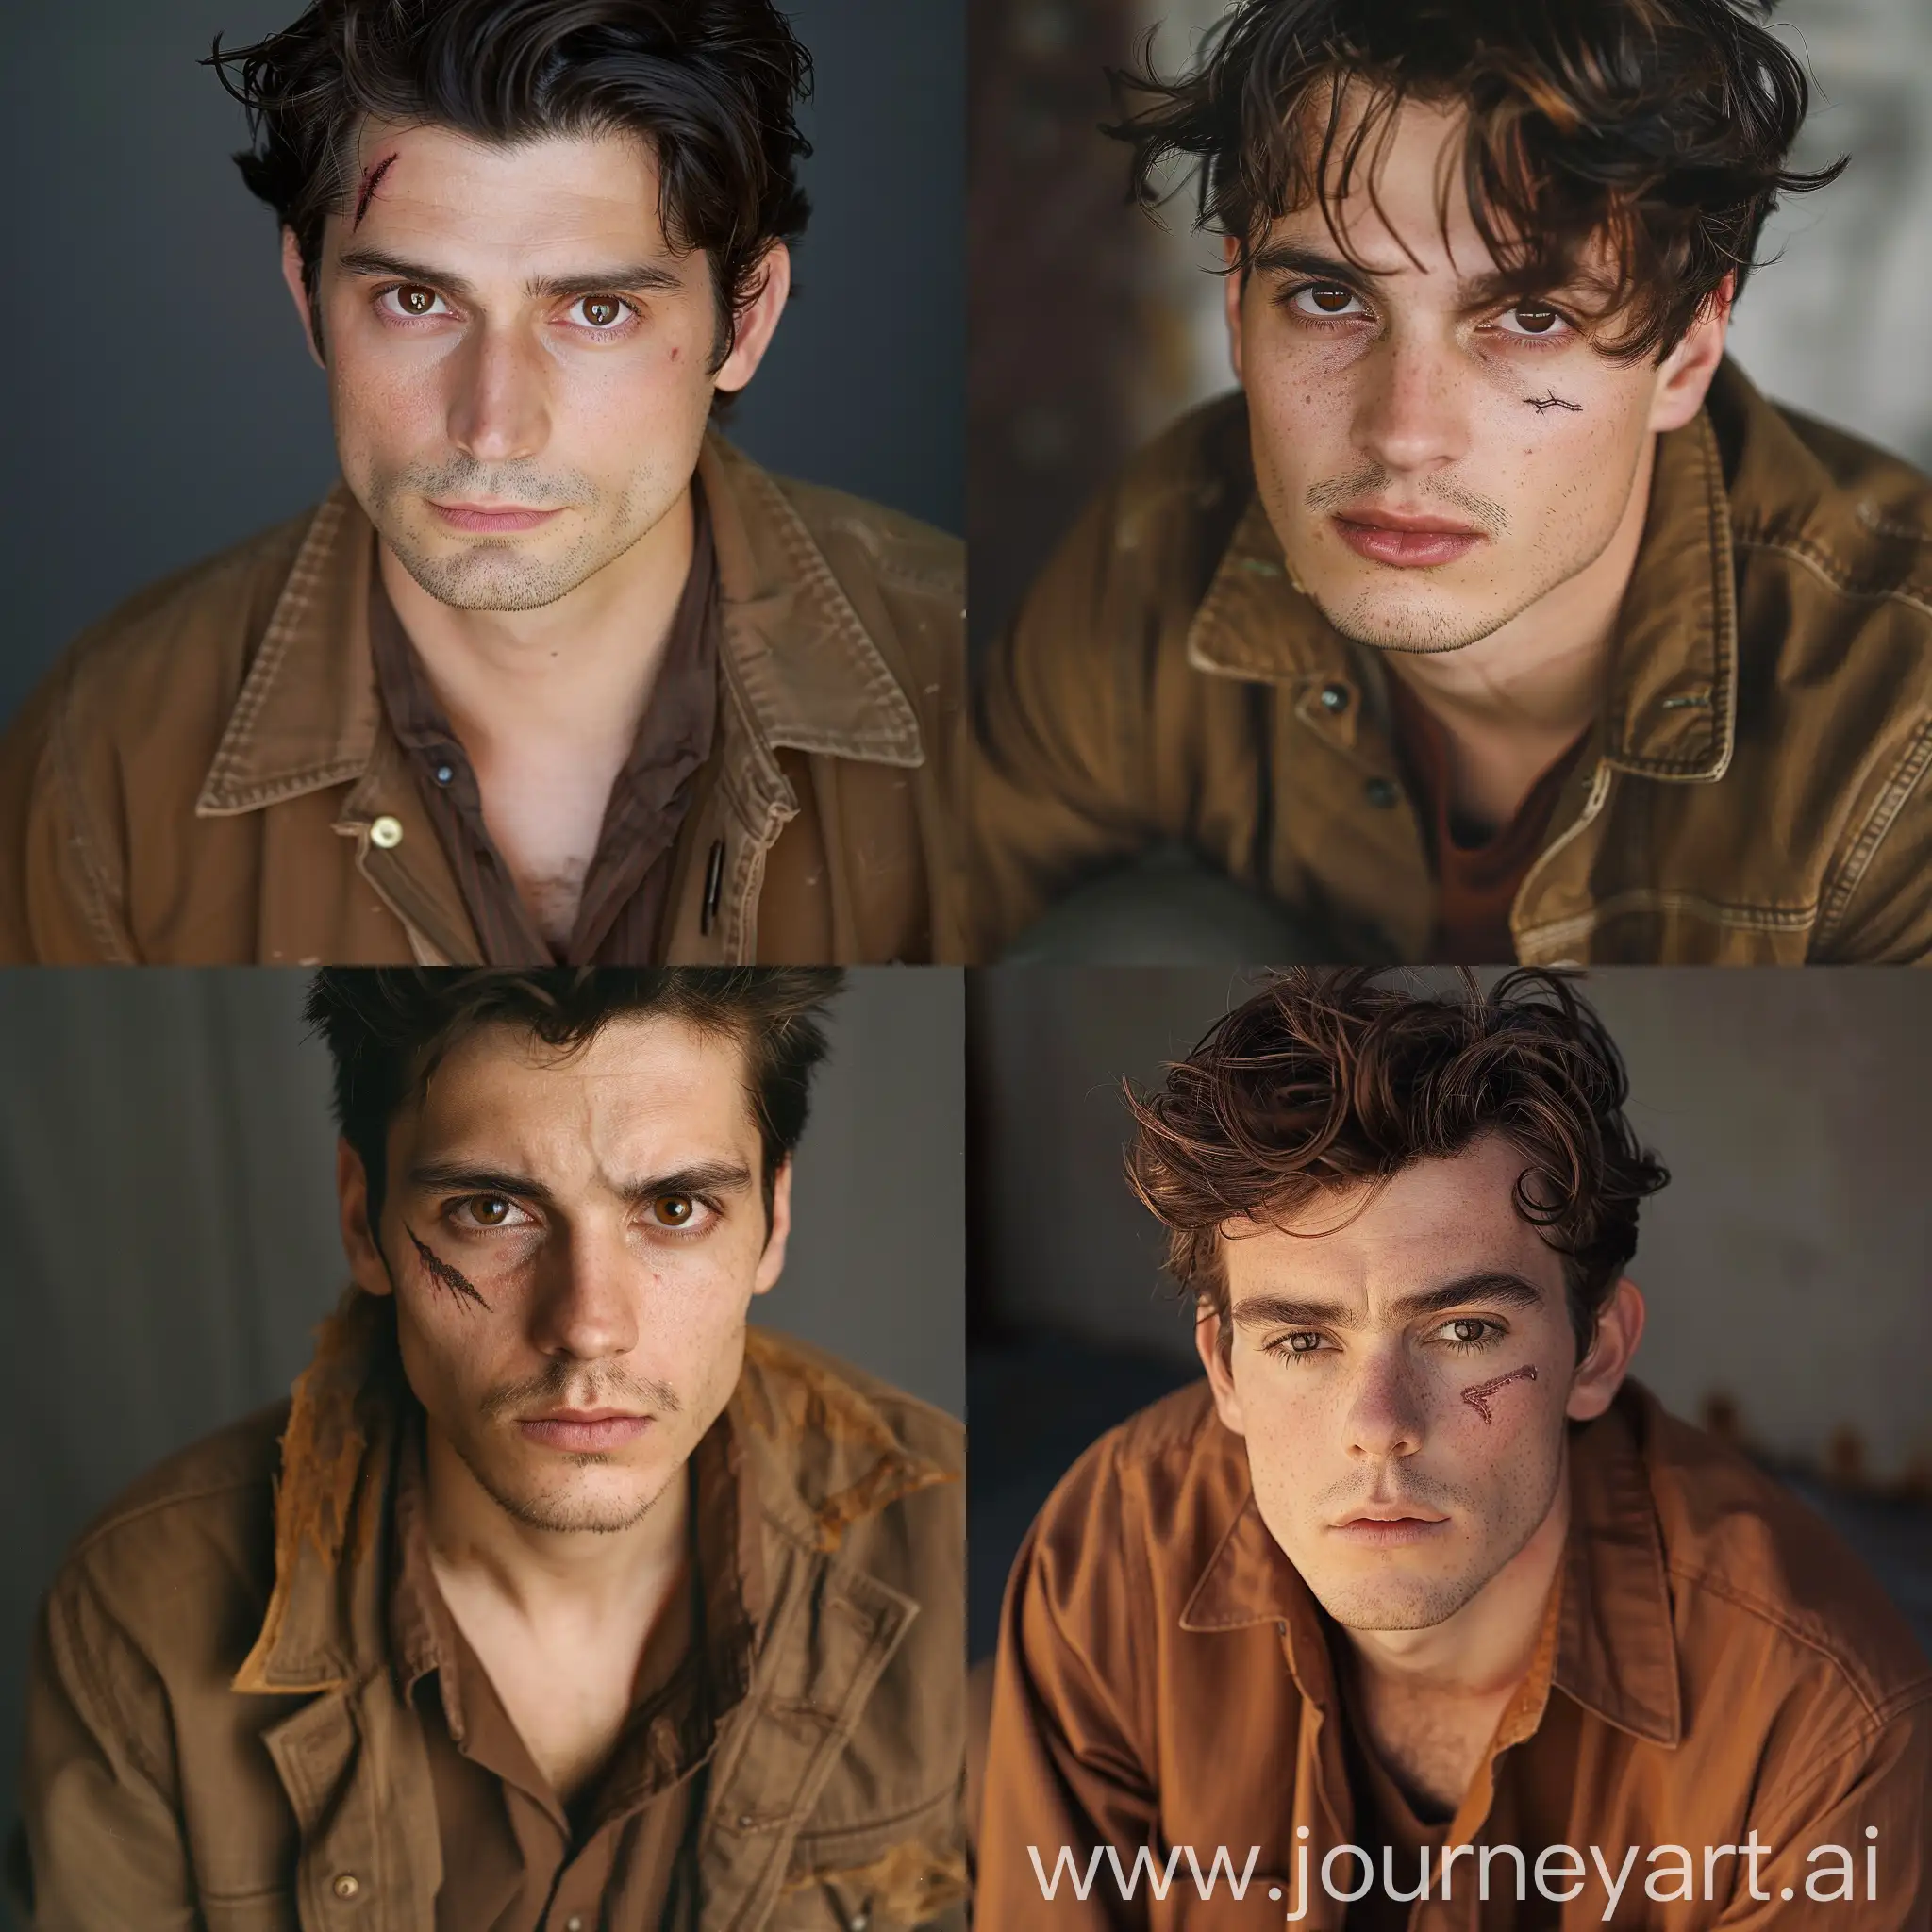 Mysterious-Man-with-Brown-Eyes-and-Scar-Portrait-in-Brown-Shirt-Jacket